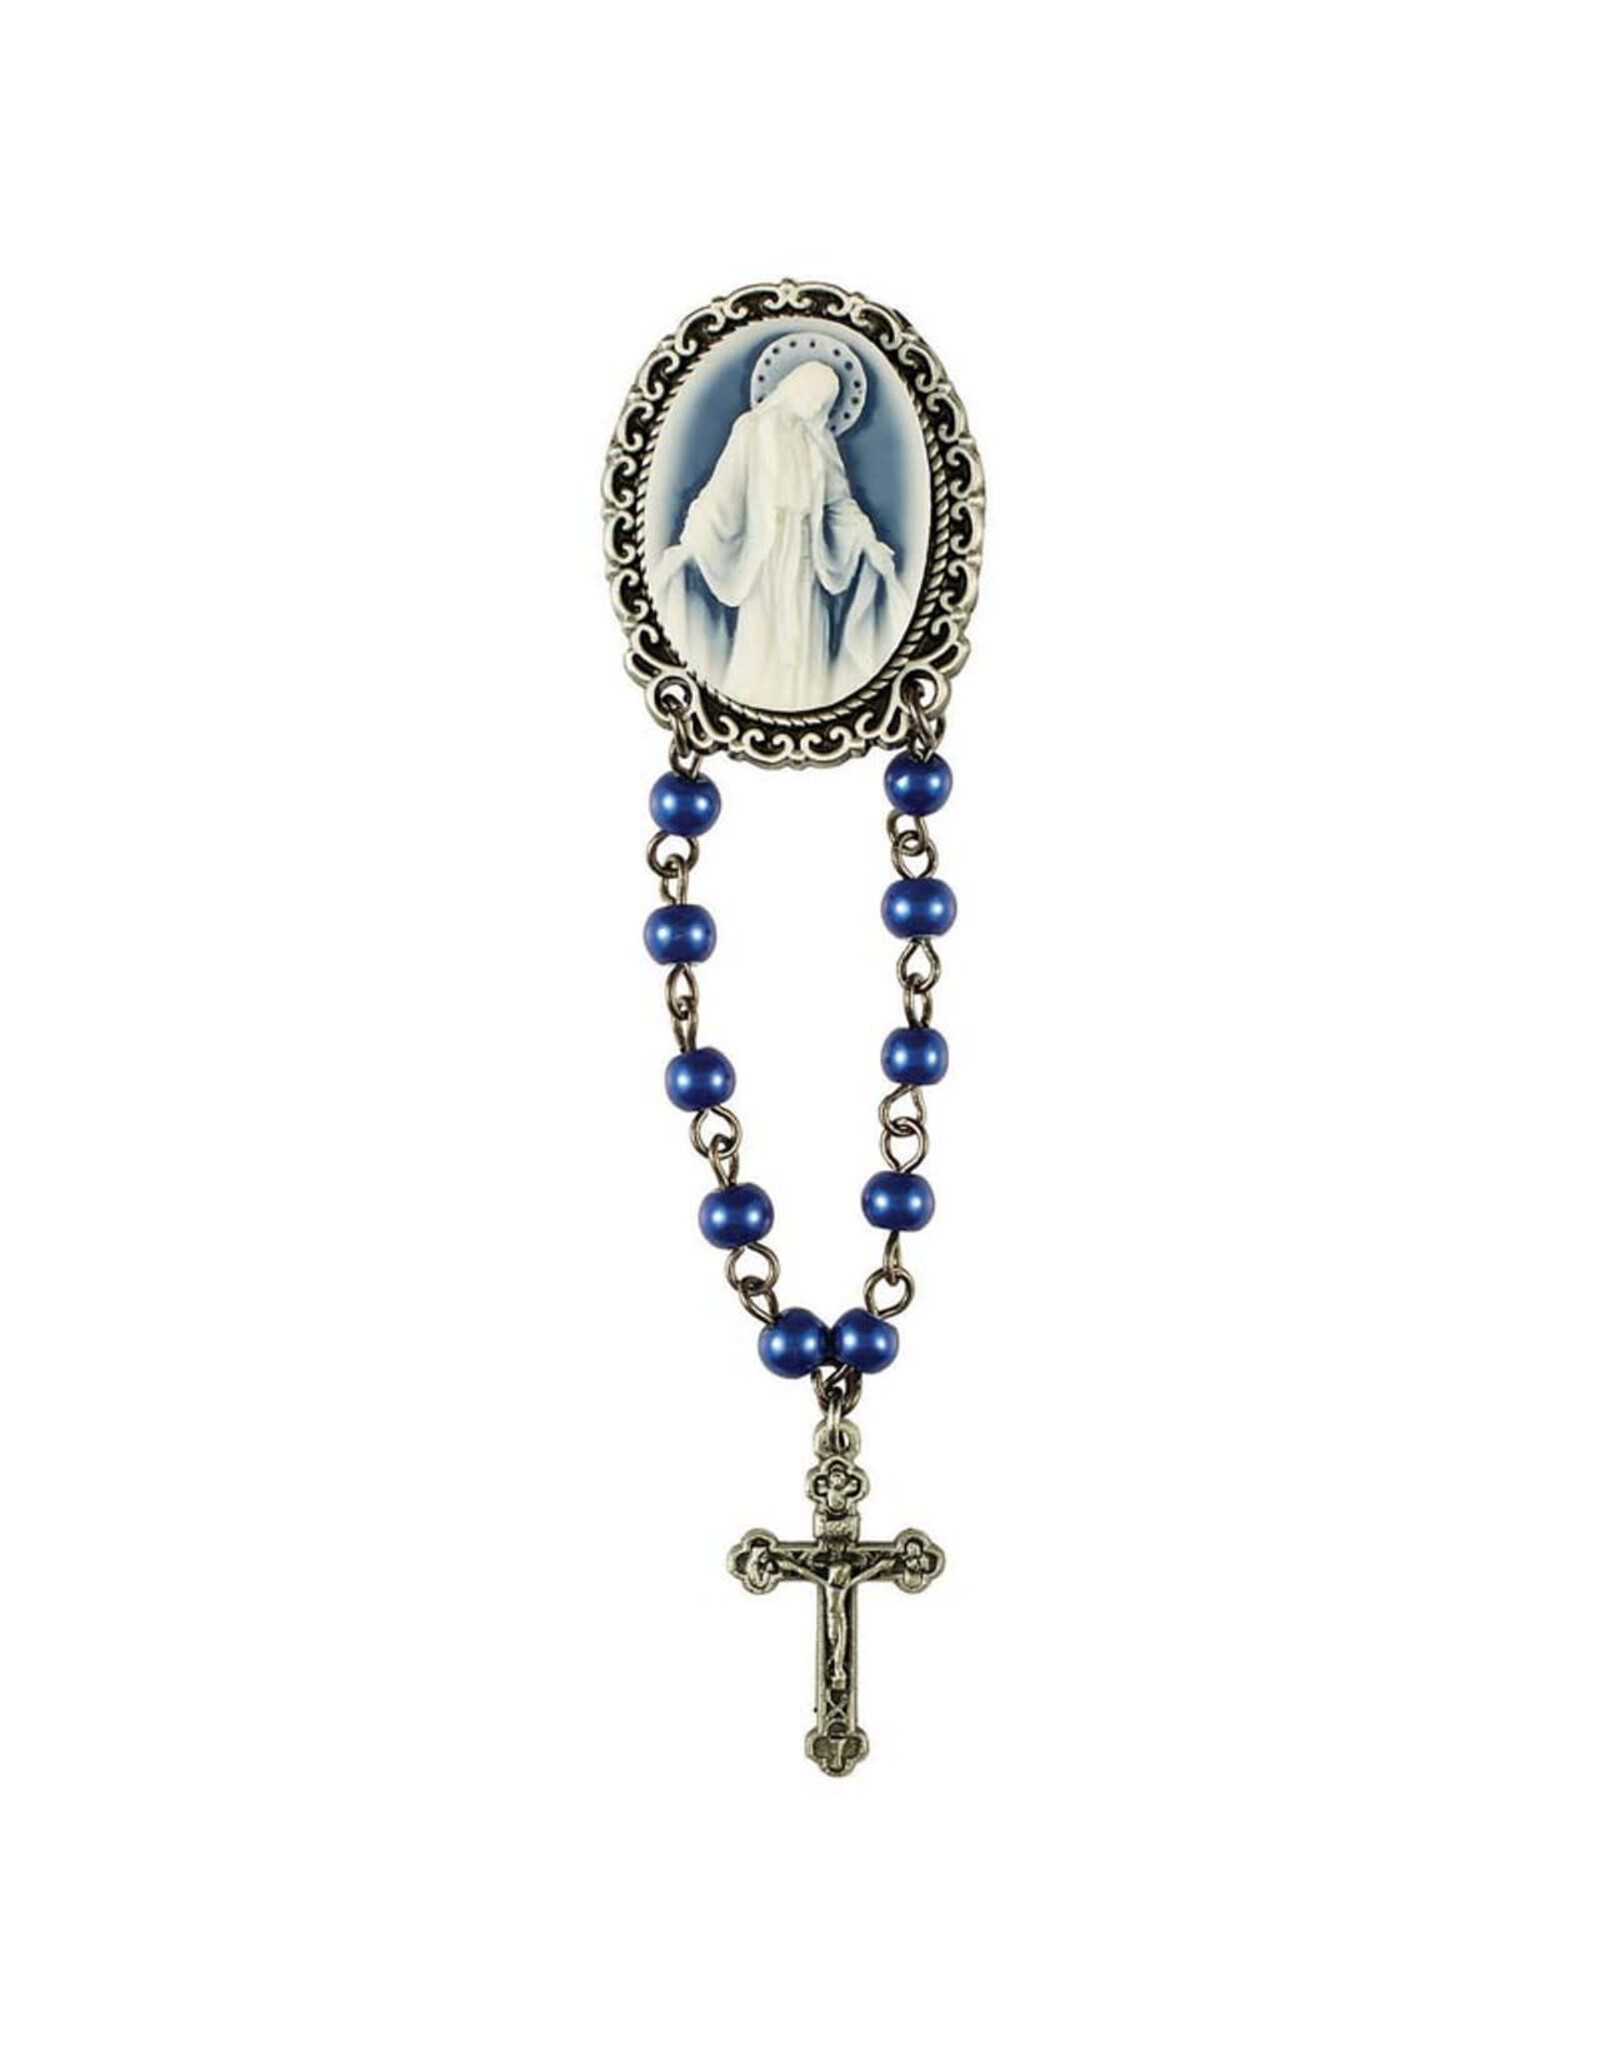 CBC - A Our Lady of Grace Cameo Rosary Pin